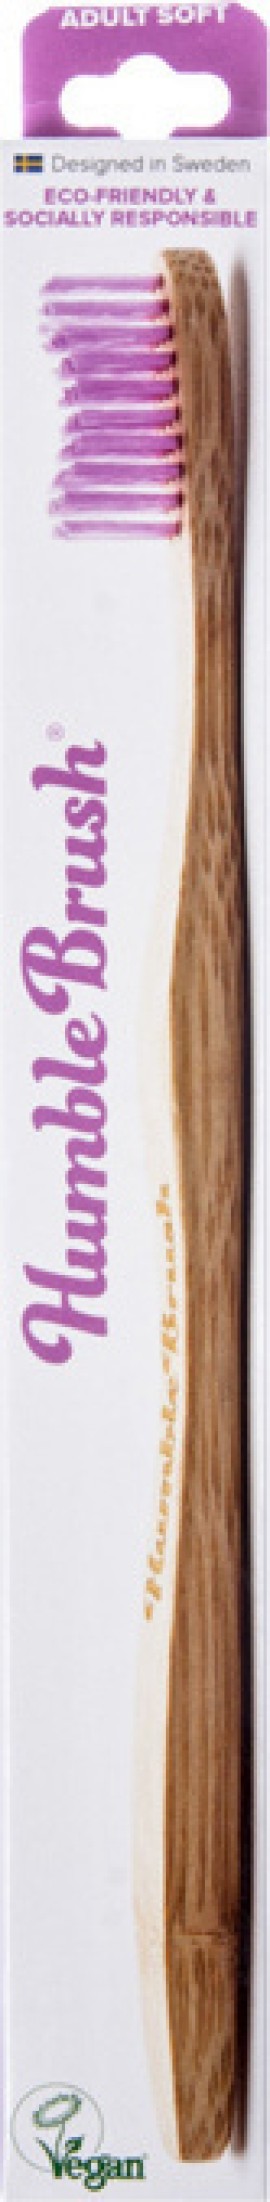 The Humble Co. Toothbrush Bamboo Purple Μωβ Οδοντόβουρτσα Απο Μπαμπού Adult Soft 1 τμχ